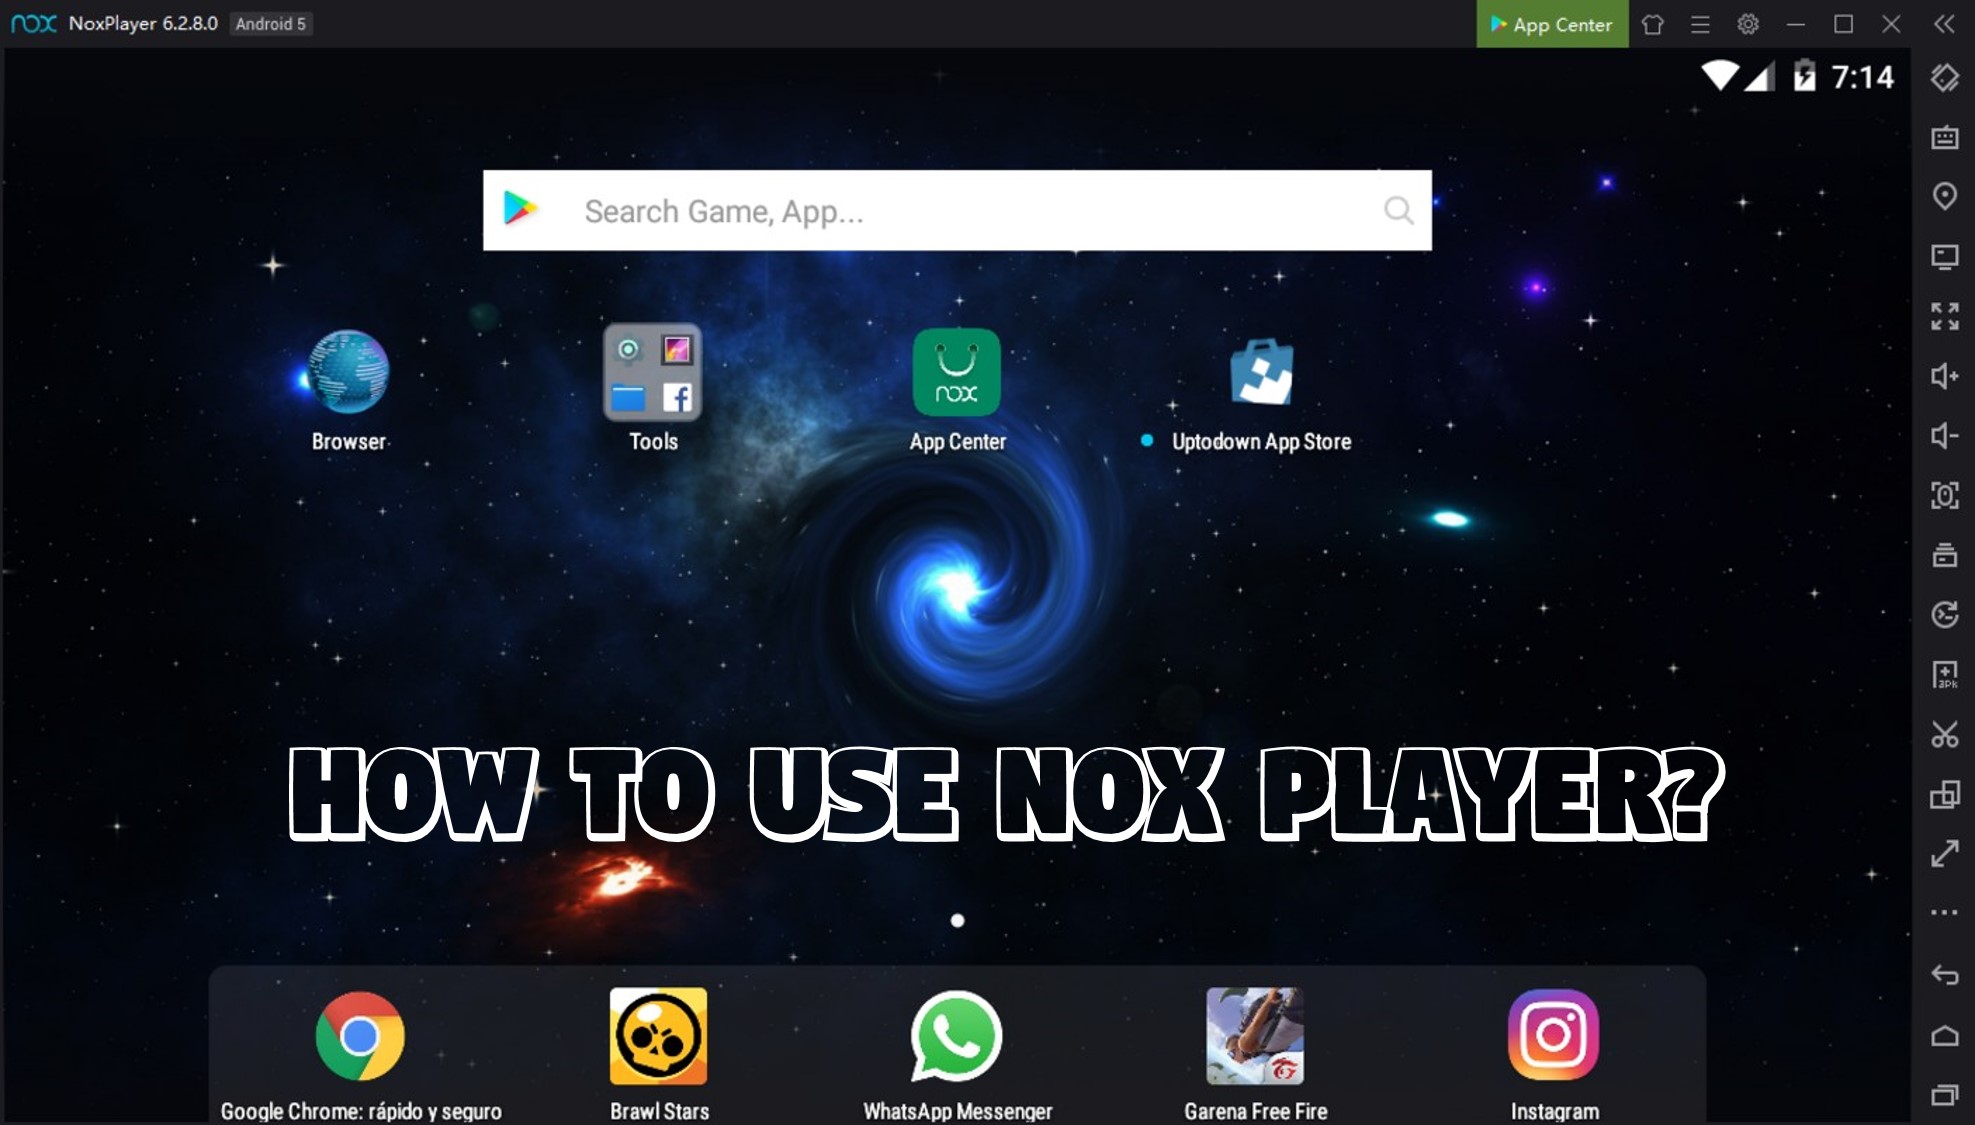 How to use Nox player